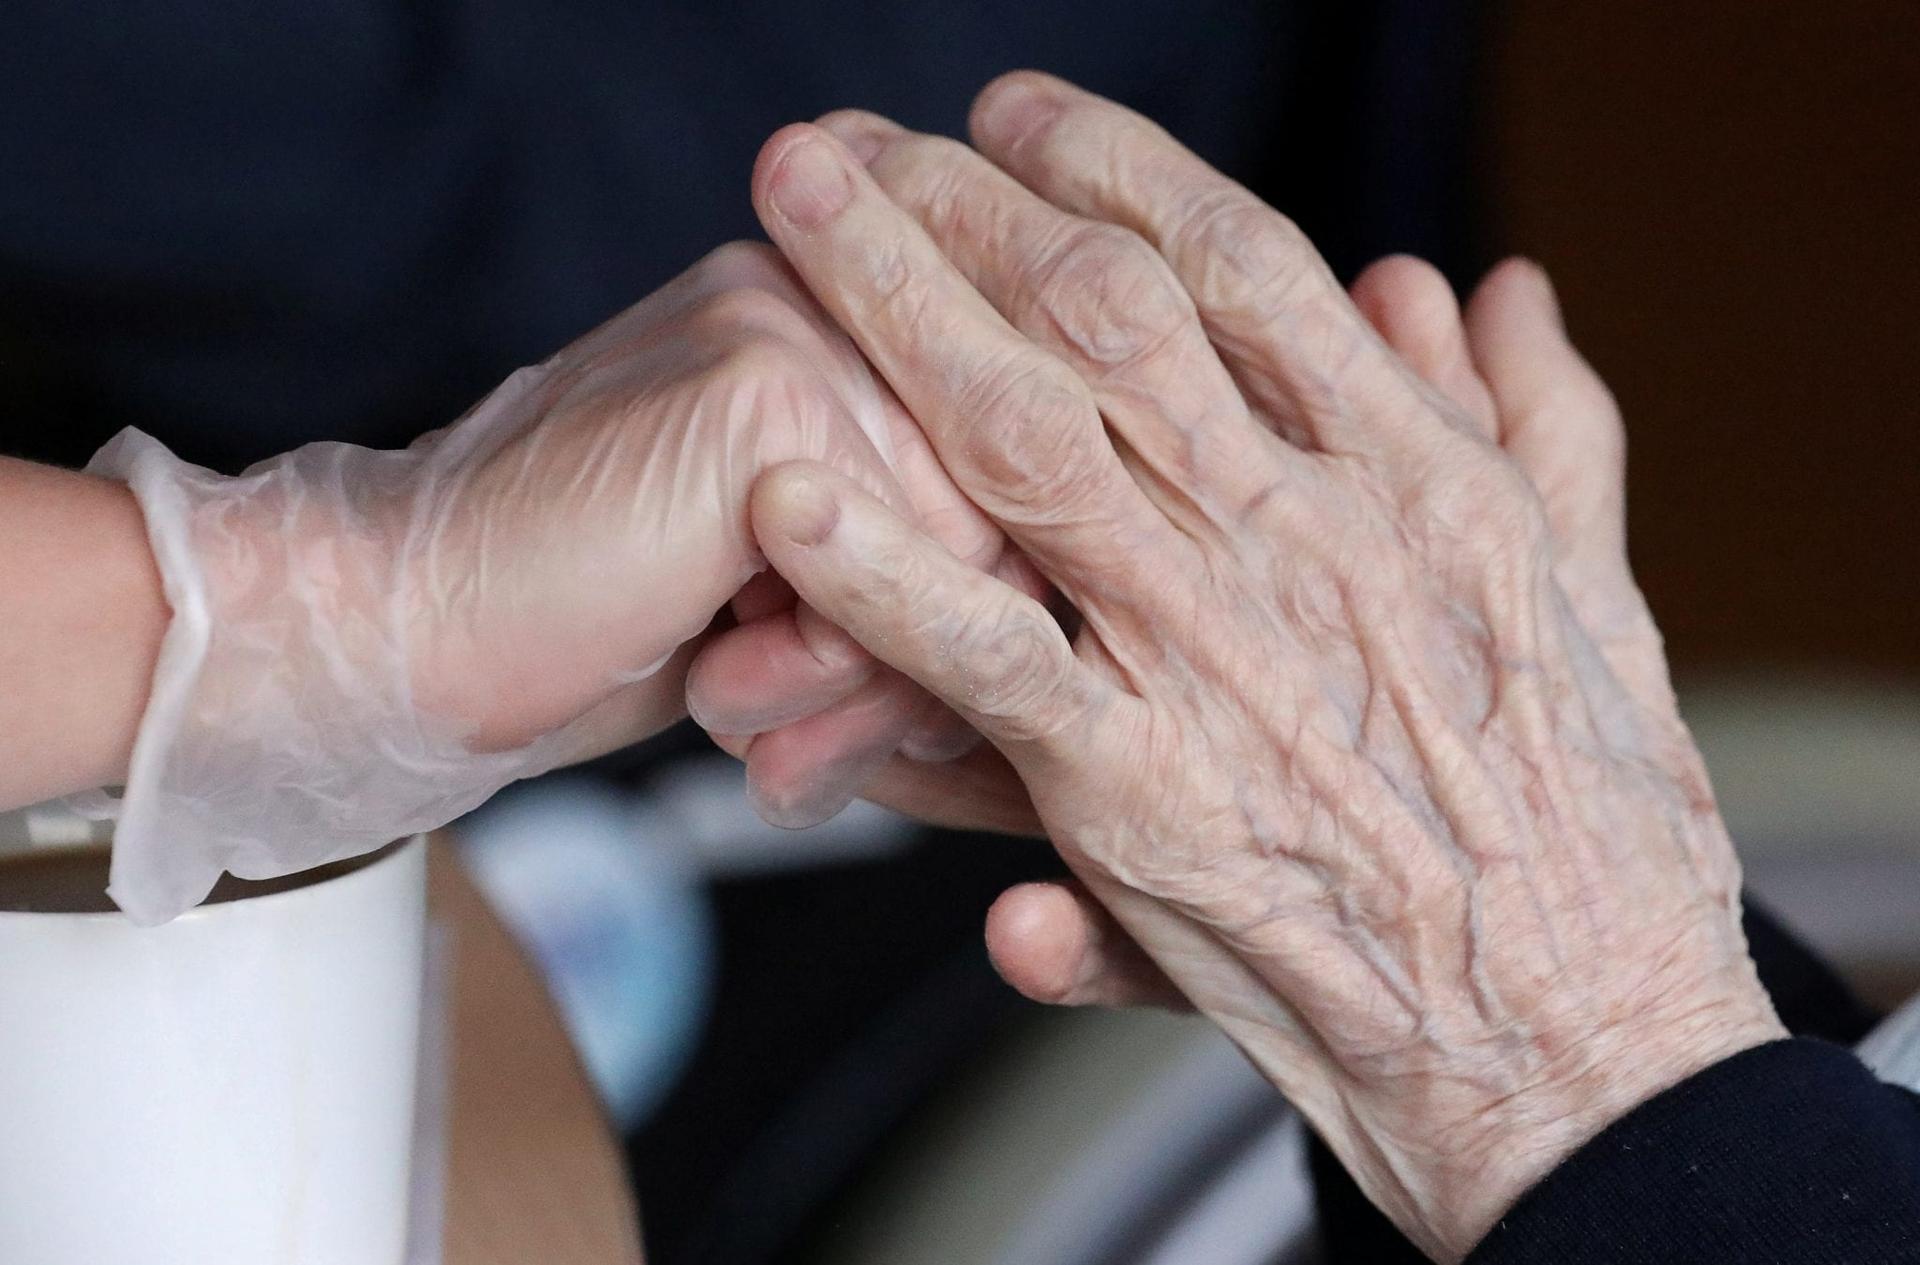 Pope prays for elderly fearful of dying alone